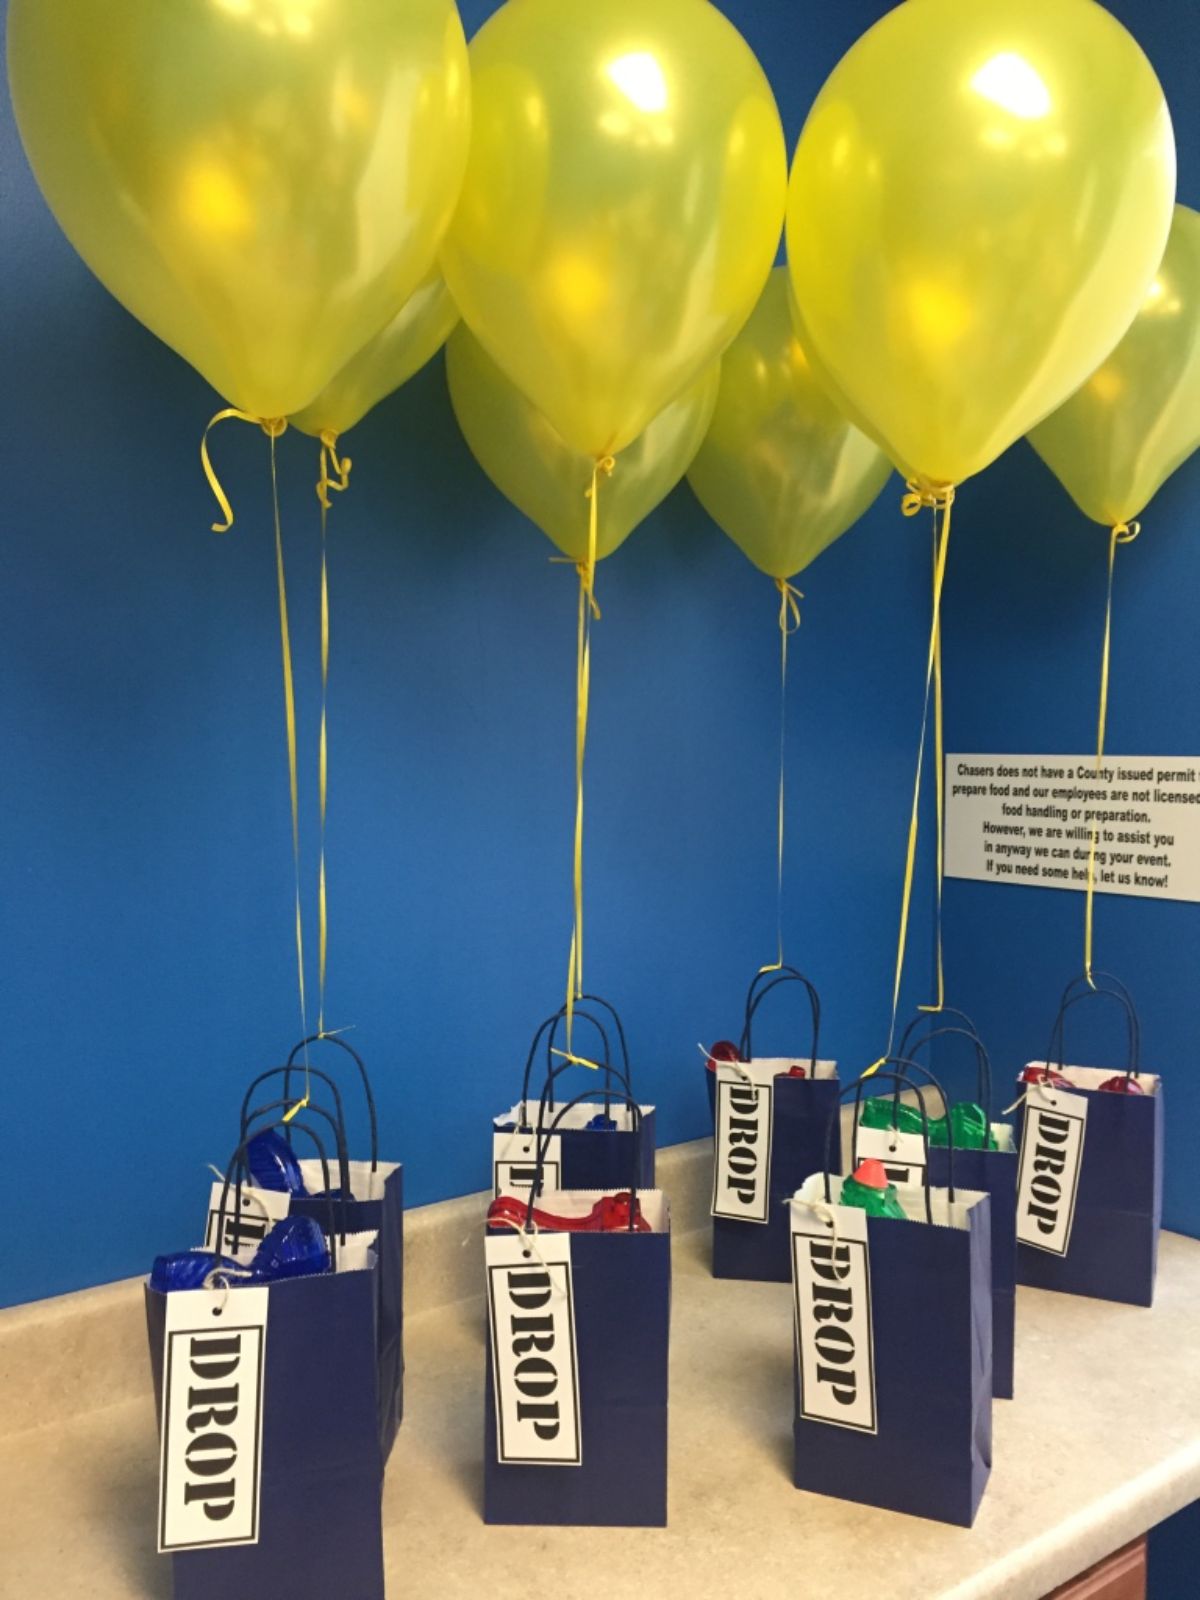 on a table, 8 blue bags labelled with "DROP" and attached to yellow balloons